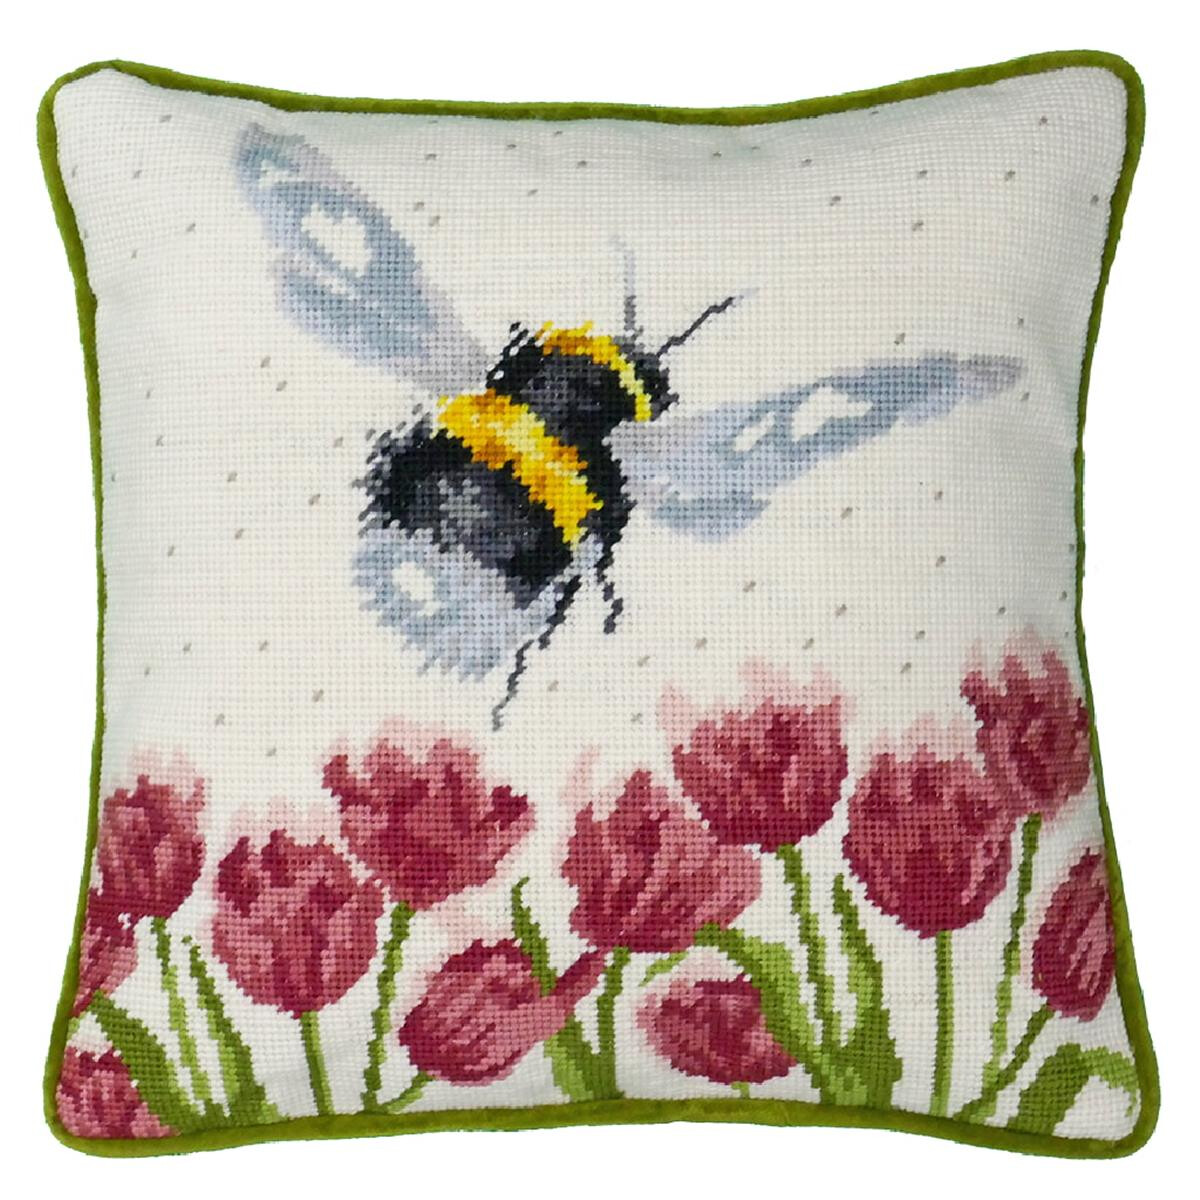 A square embroidery cushion shows a large bumblebee with...